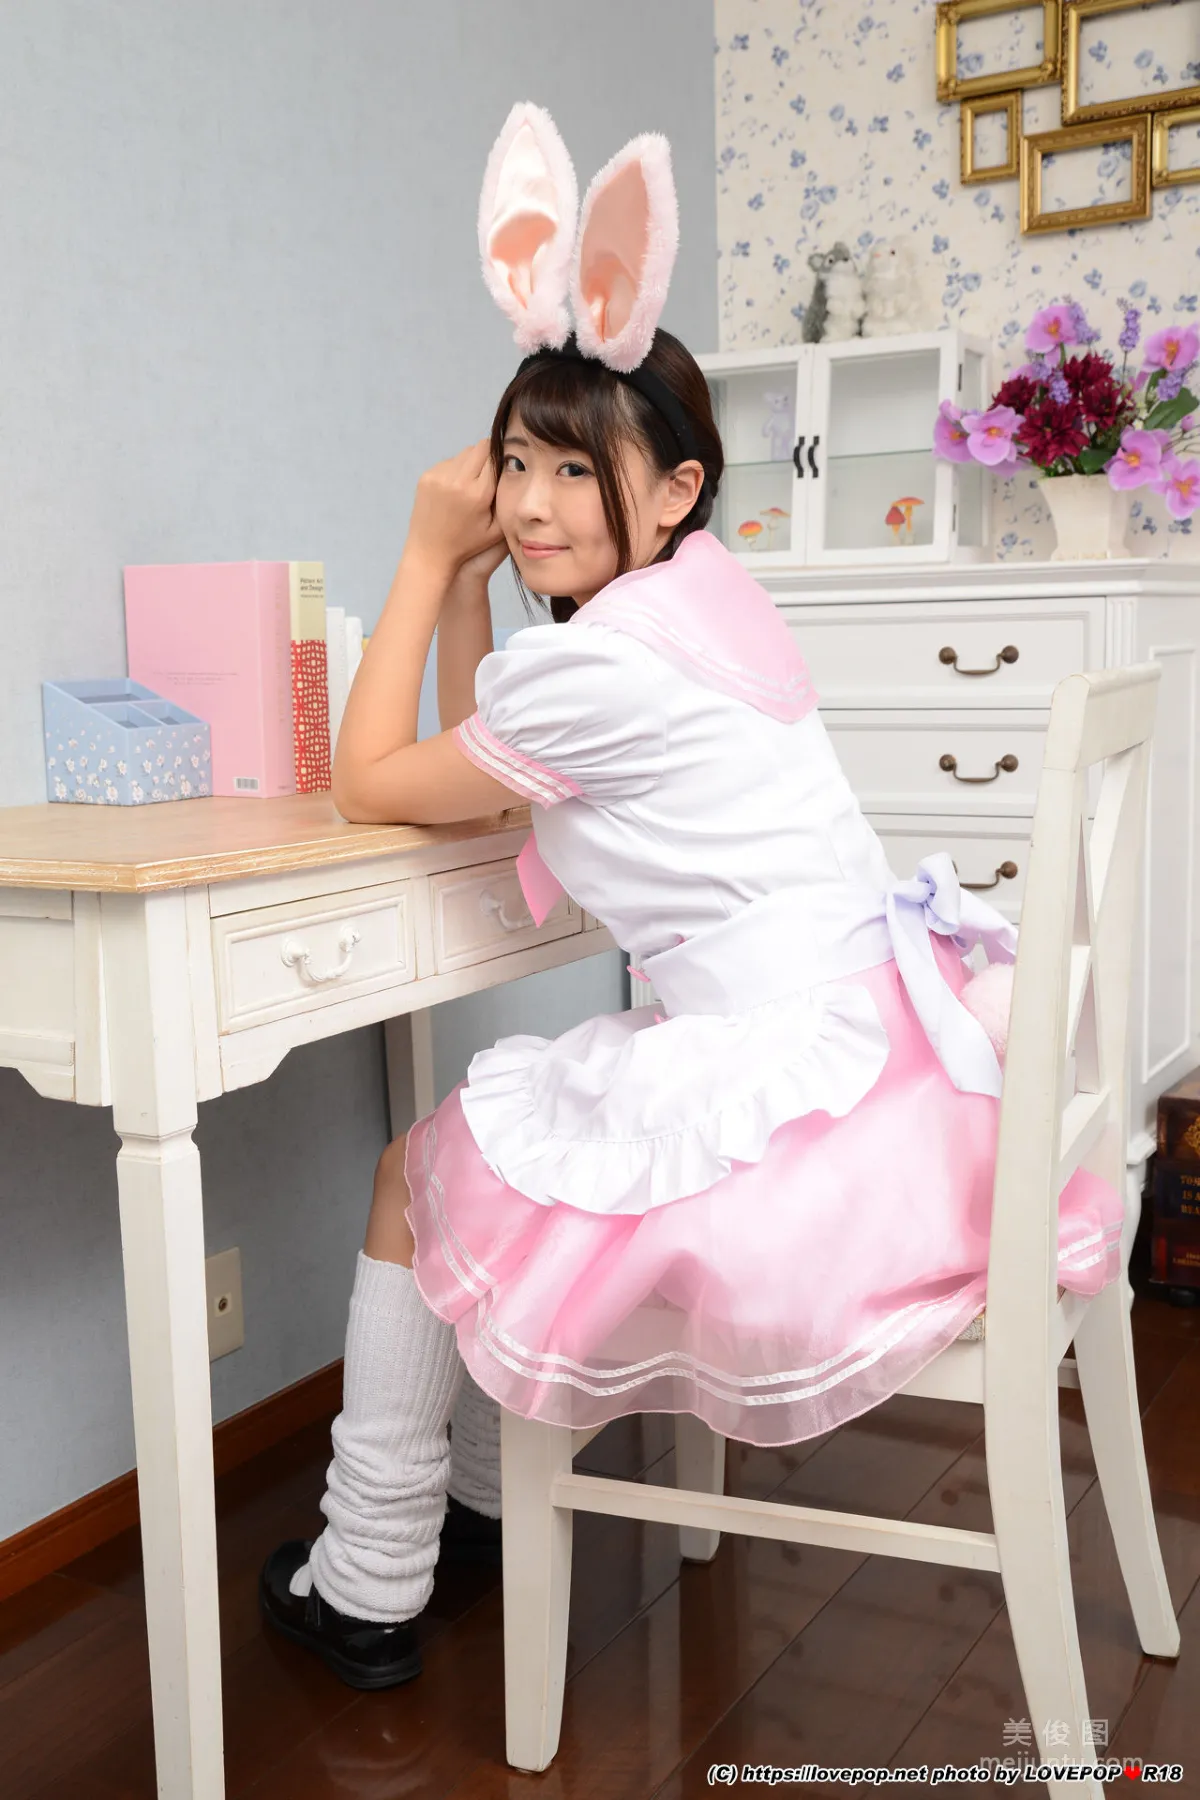 [LOVEPOP] Special Maid Collection - さとう愛理 Photoset 041